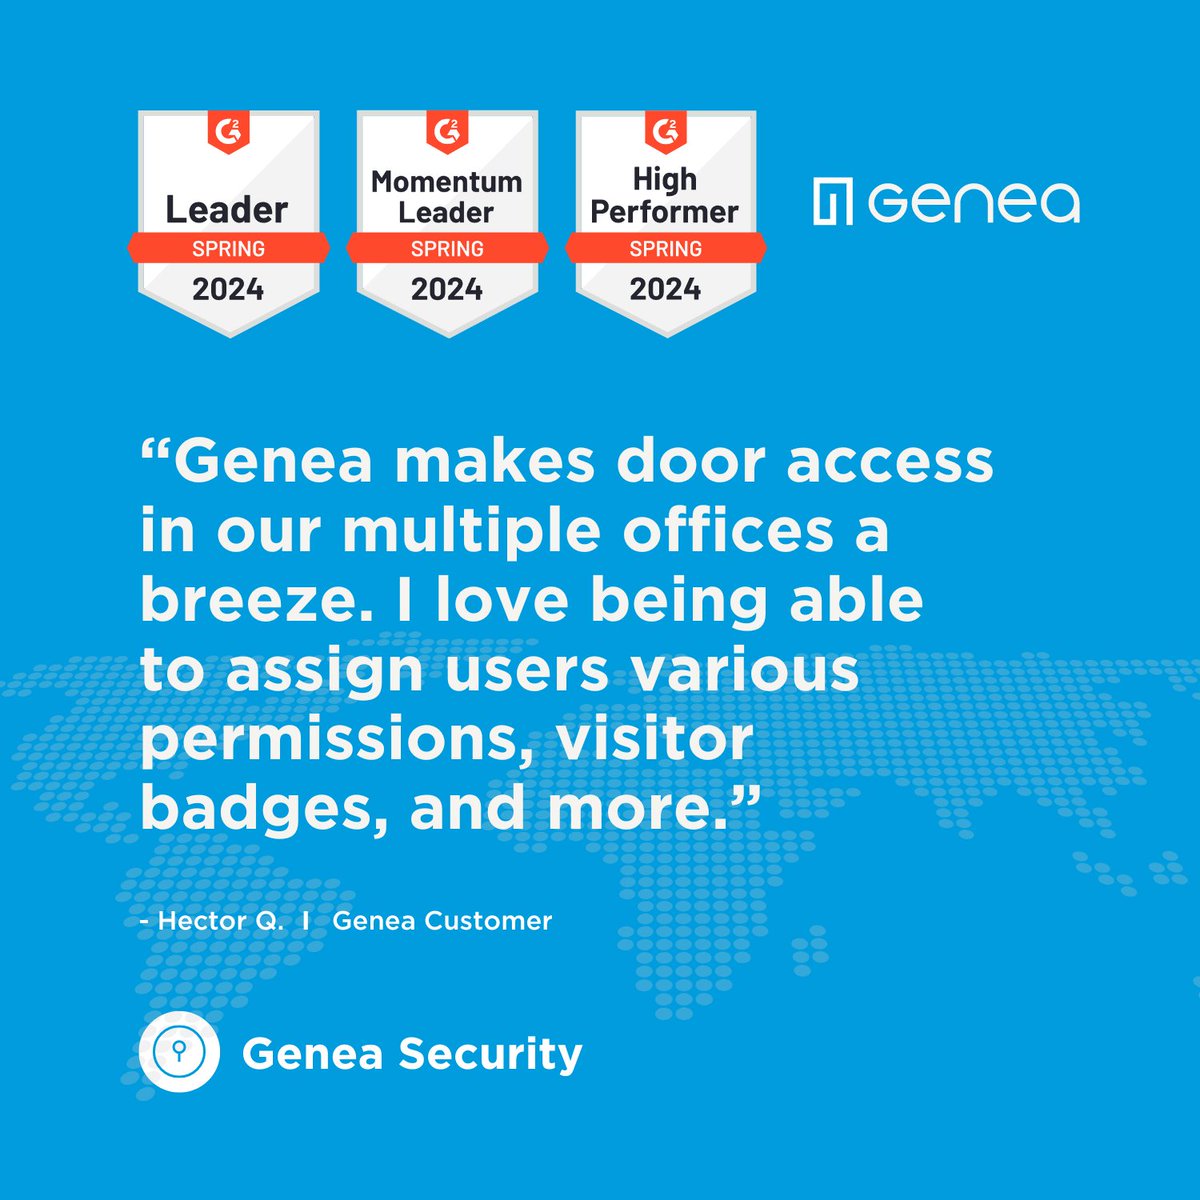 Explore the benefits of Genea Security. 
Find out how we helped a Fortune 50 Company with 142 locations and 180,000 users migrate to a cloud-based access control system, built on non-proprietary hardware. #geneasecurity #cloudbased #accesscontrol hubs.la/Q02t1C-_0